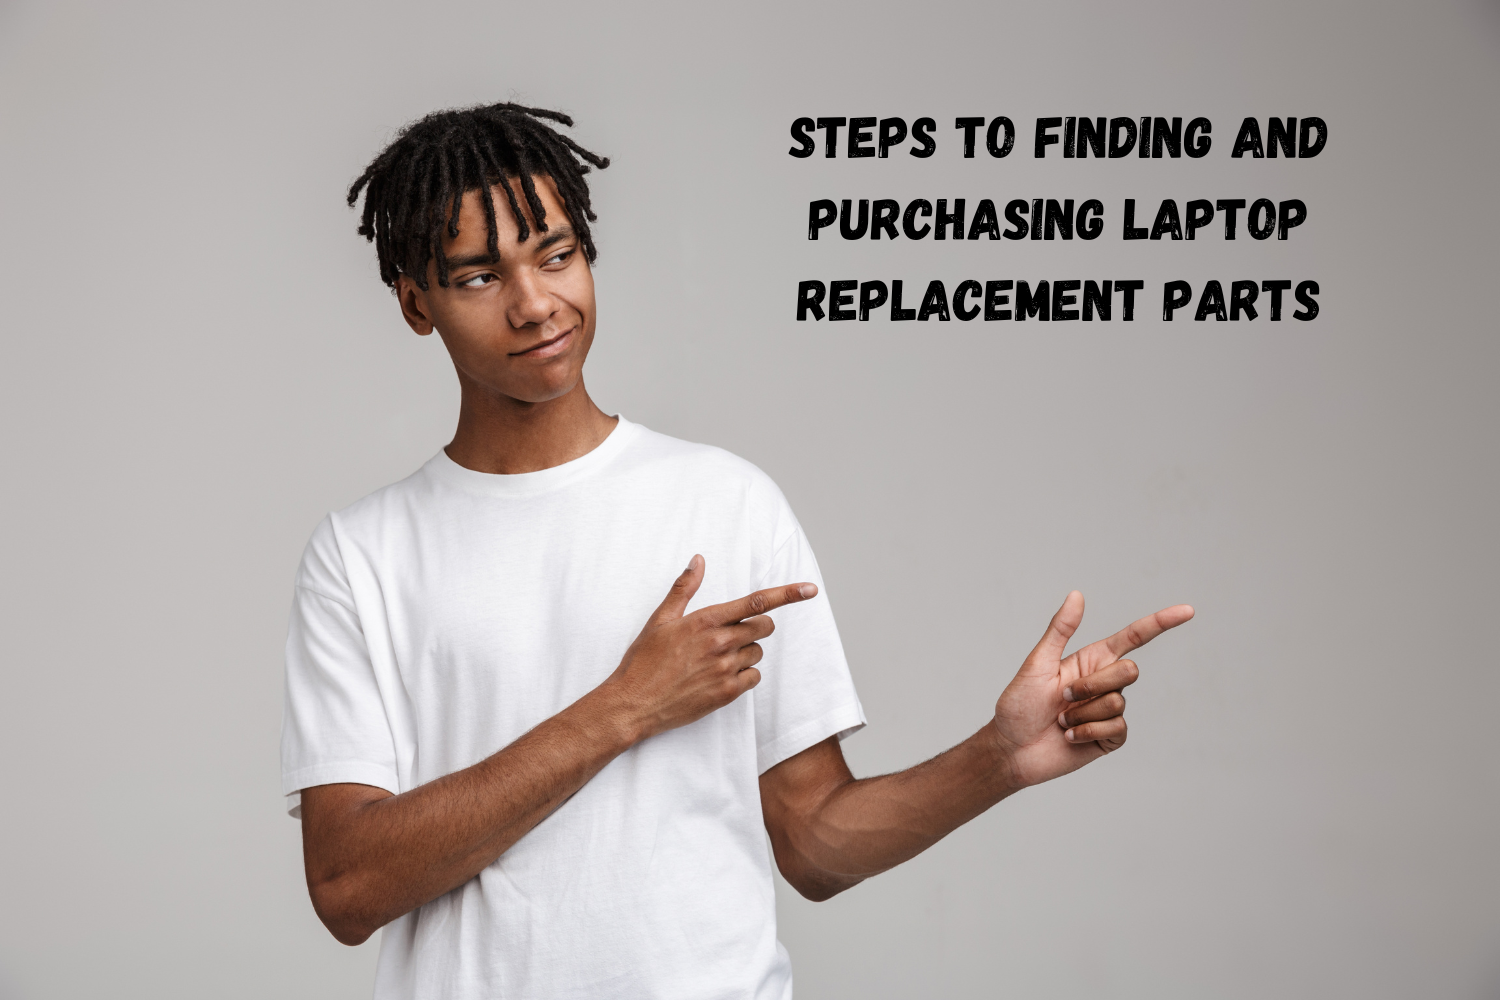 Steps to Finding and Purchasing Laptop Replacement Parts